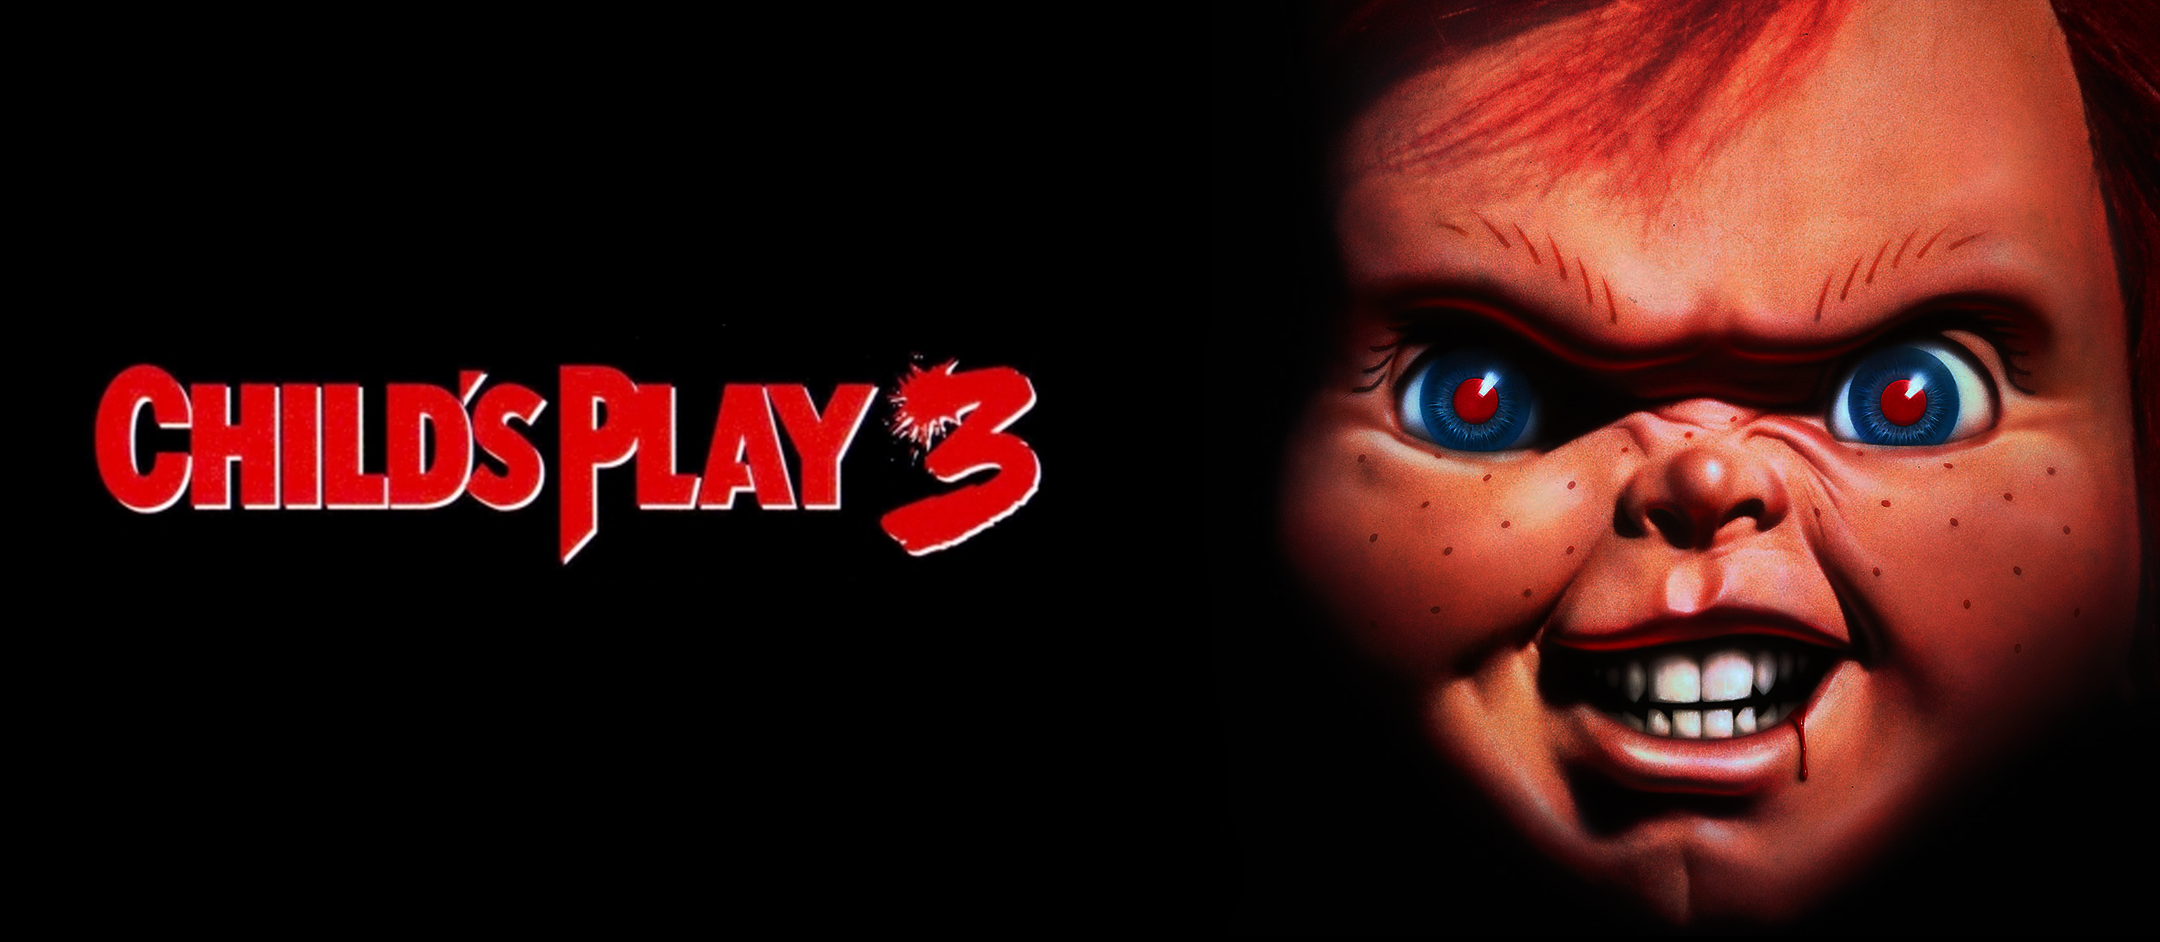 Child's Play 3 Backgrounds, Compatible - PC, Mobile, Gadgets| 2160x942 px